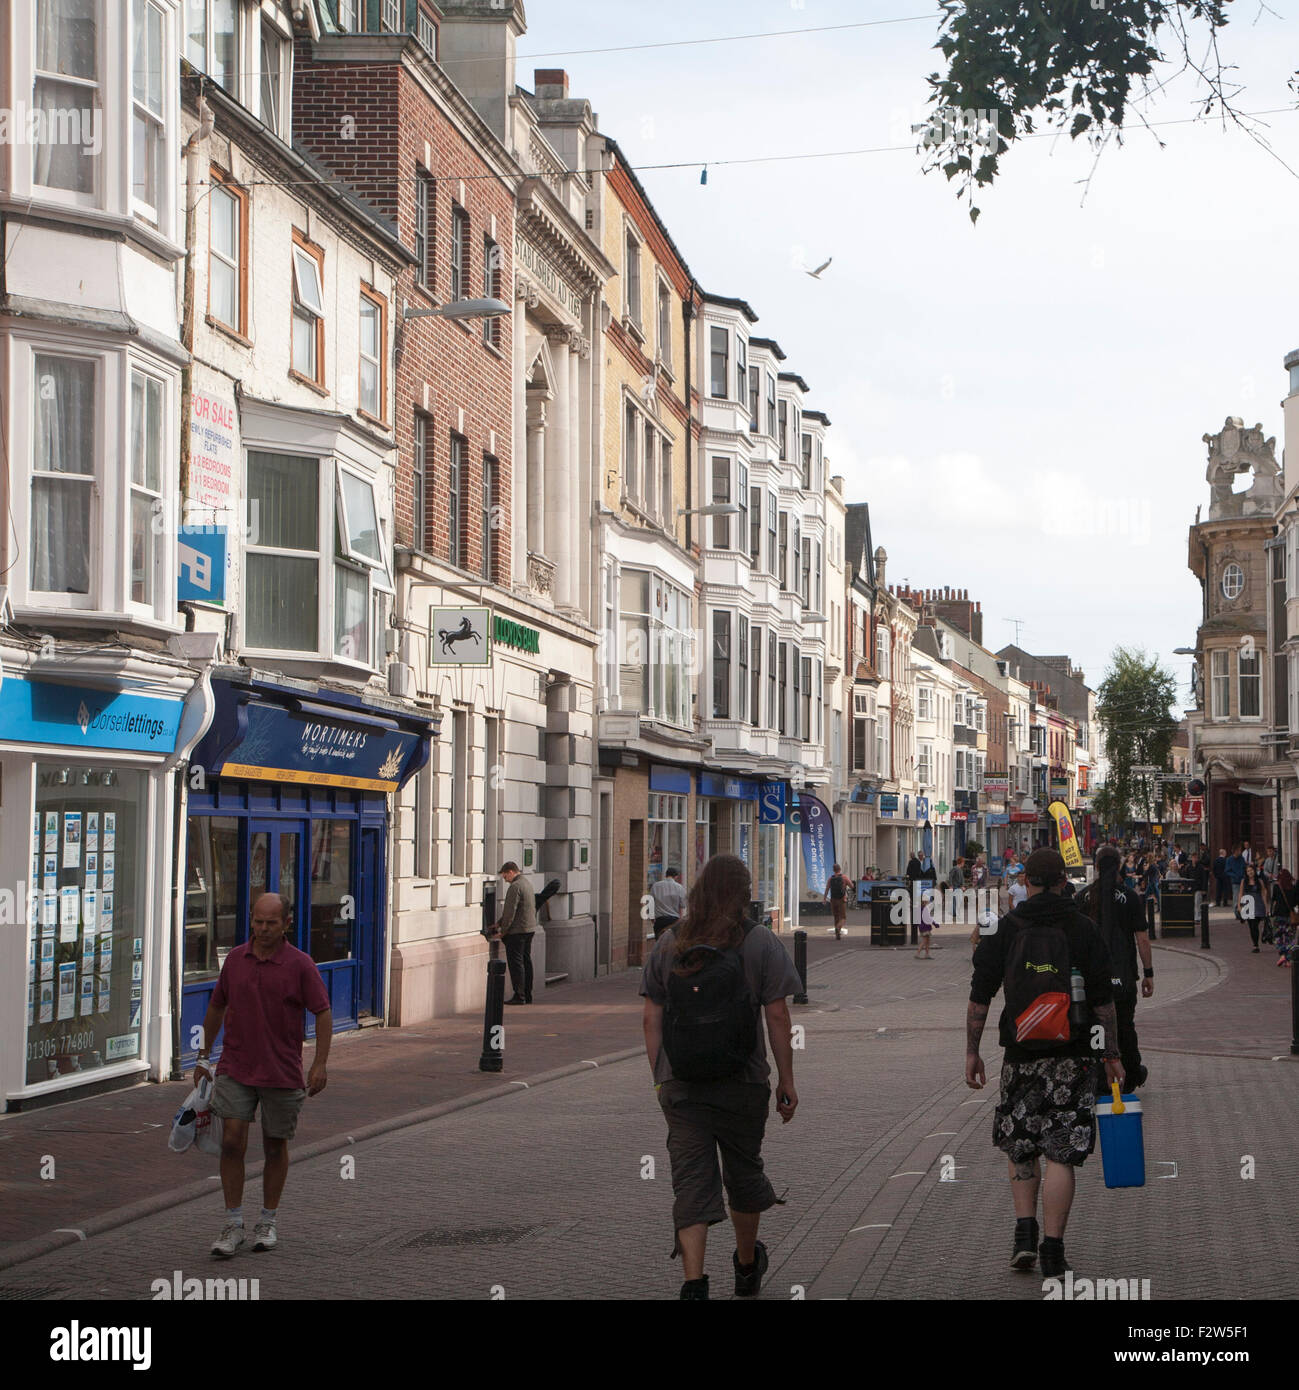 People in town centre of Weymouth, Dorset, England, UK Stock Photo